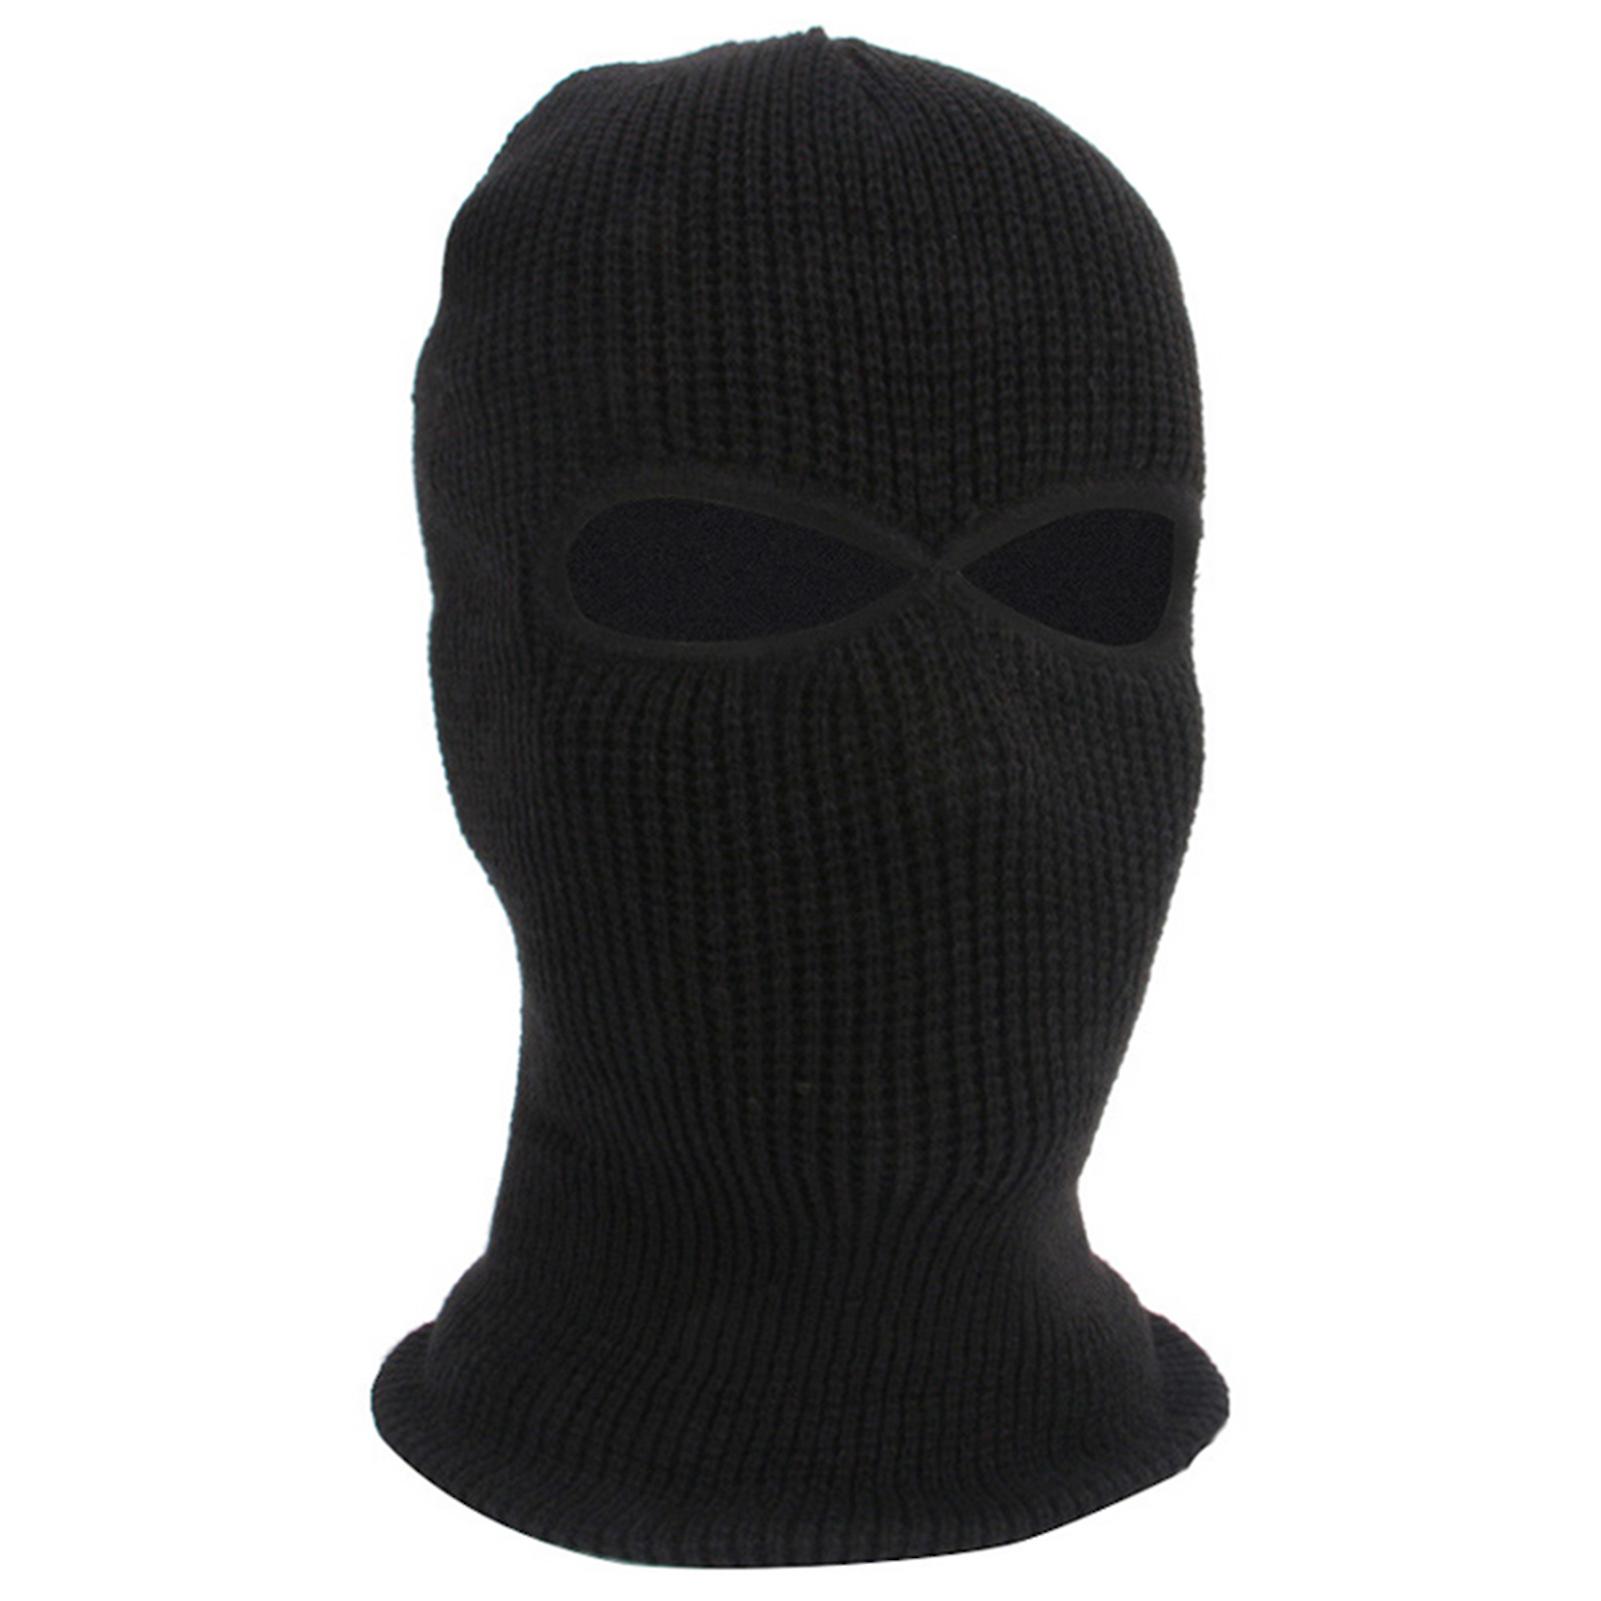 Winter Warm Scarf Mask Cold Weather Ski Masks For Men Women Windproof Thermal Neck Warmer Hood For Outdoor Cycling Running Skiing